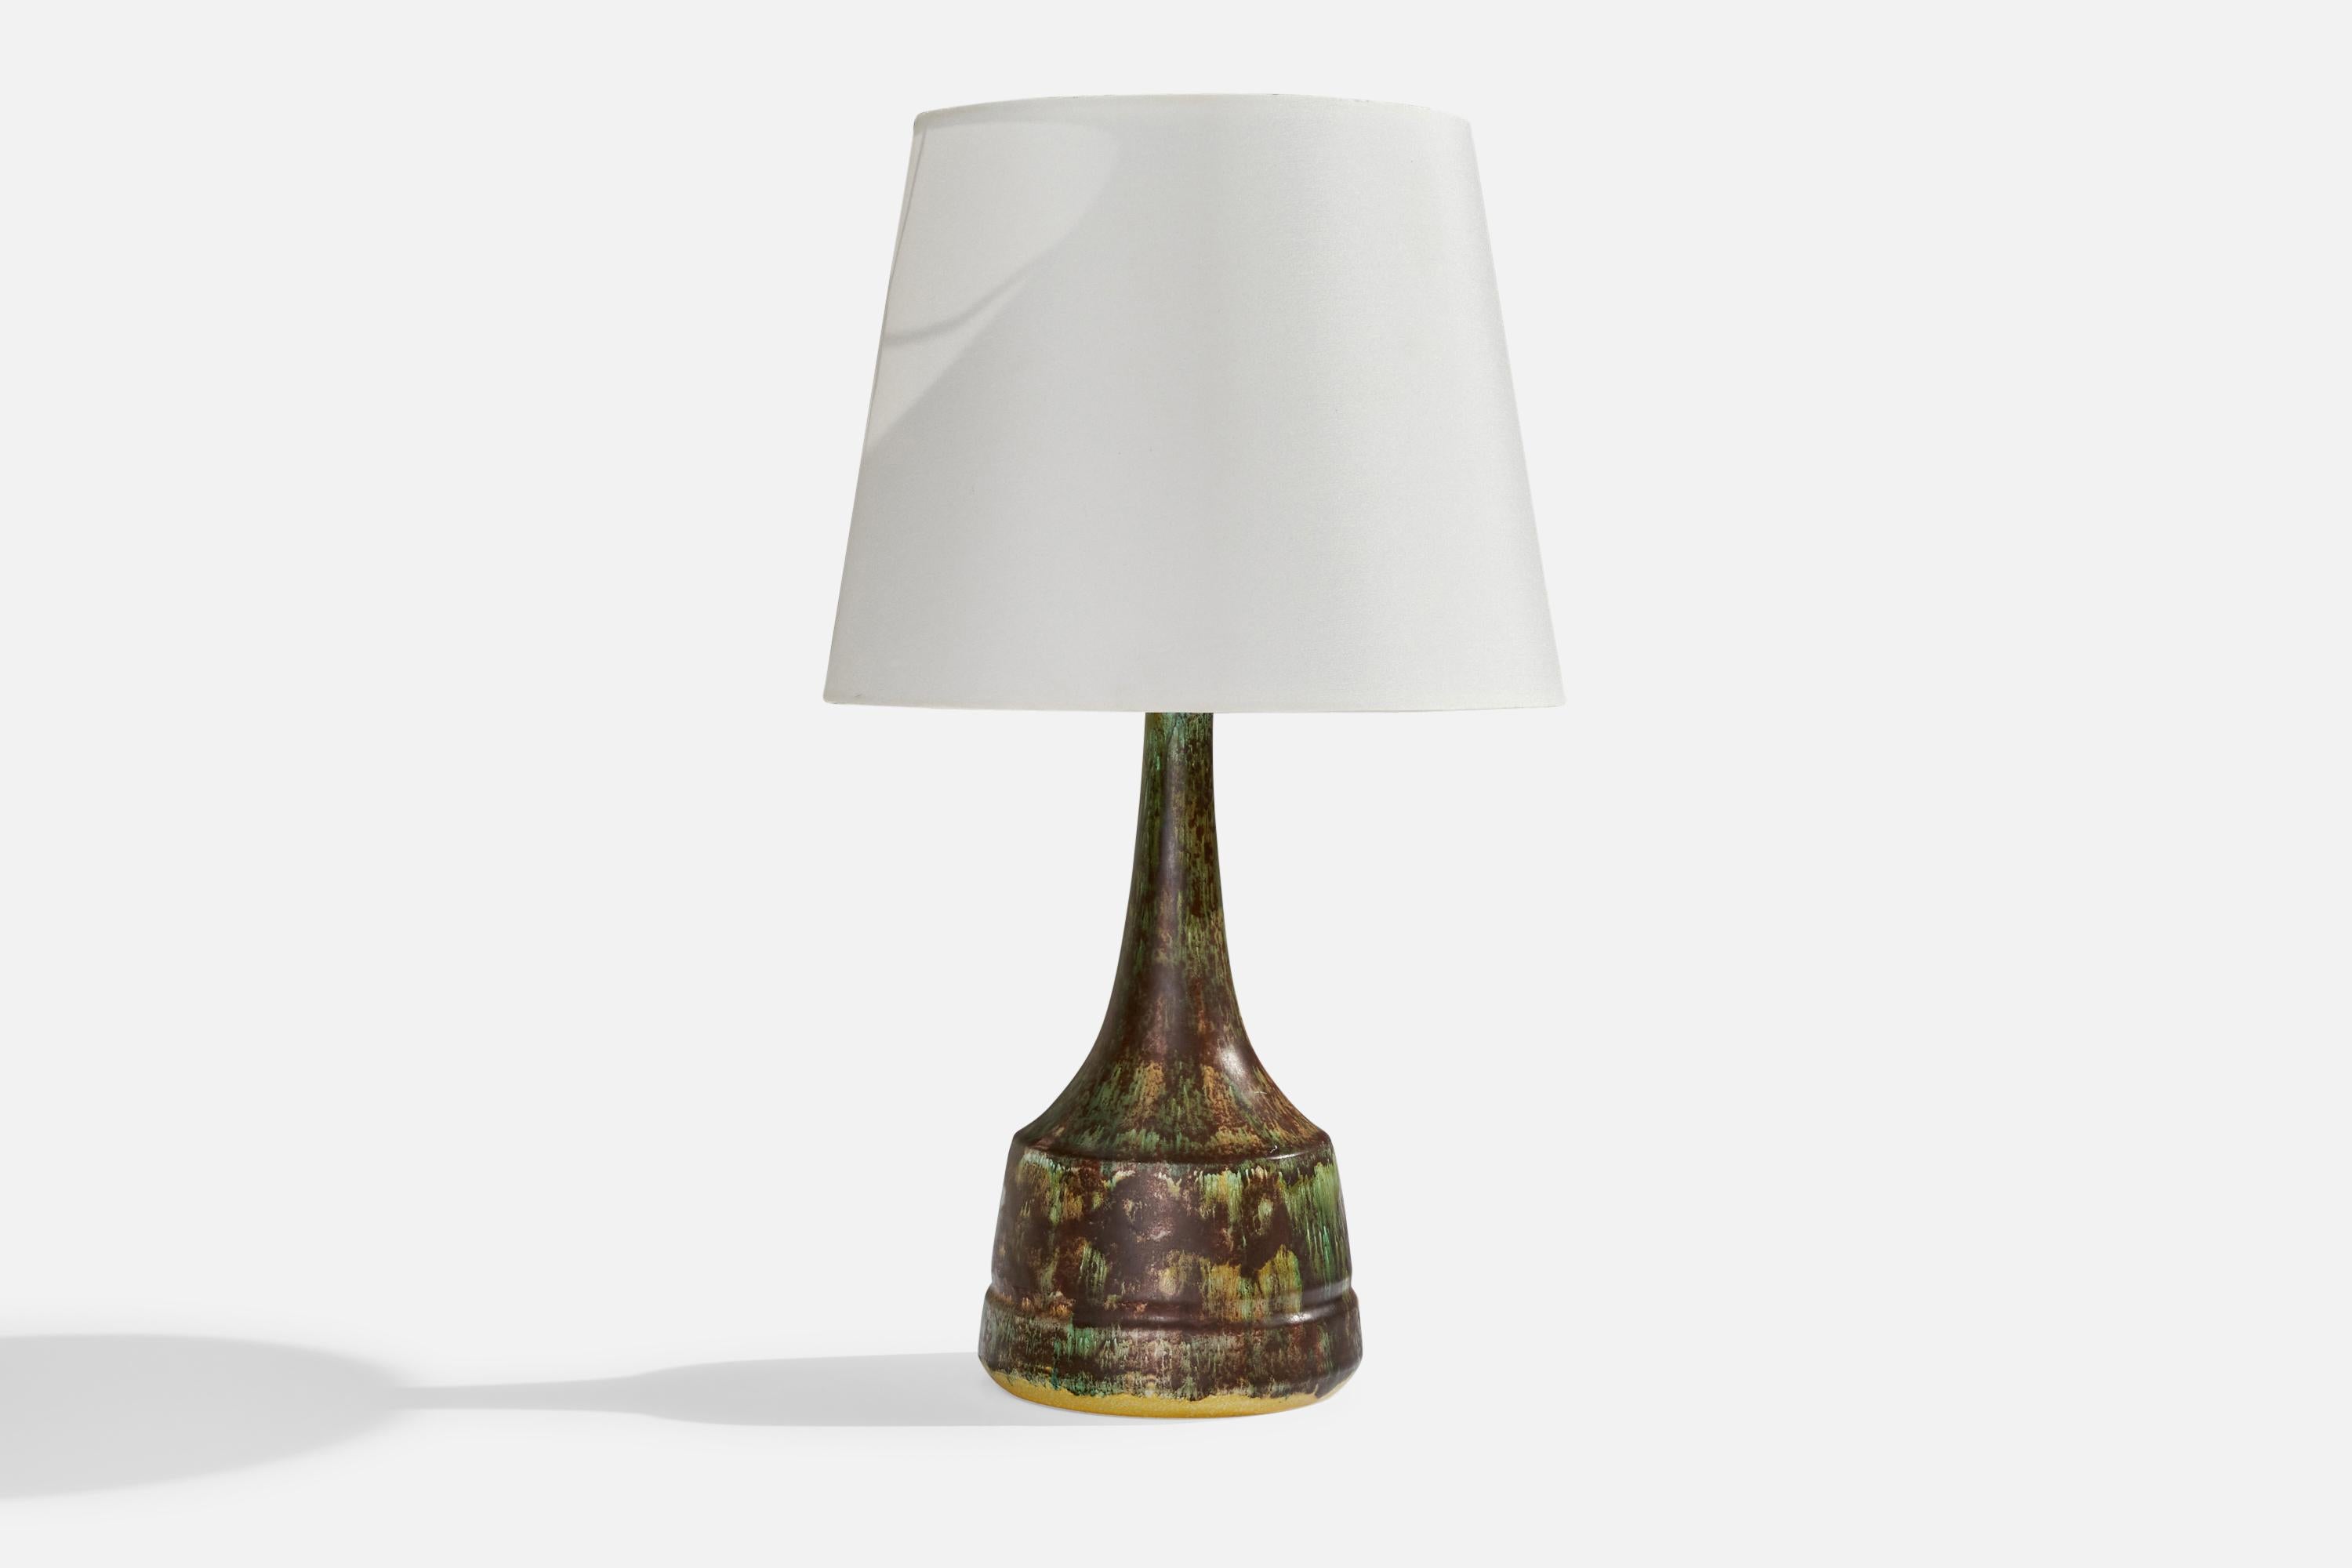 A green and brown-glazed ceramic table lamp designed and produced in Denmark, c. 1960s. 

Dimensions of Lamp (inches): 12”  H x 5.4” Diameter
Dimensions of Shade (inches): 7.5”  Top Diameter x 10”  Bottom Diameter x 8” H
Dimensions of Lamp with